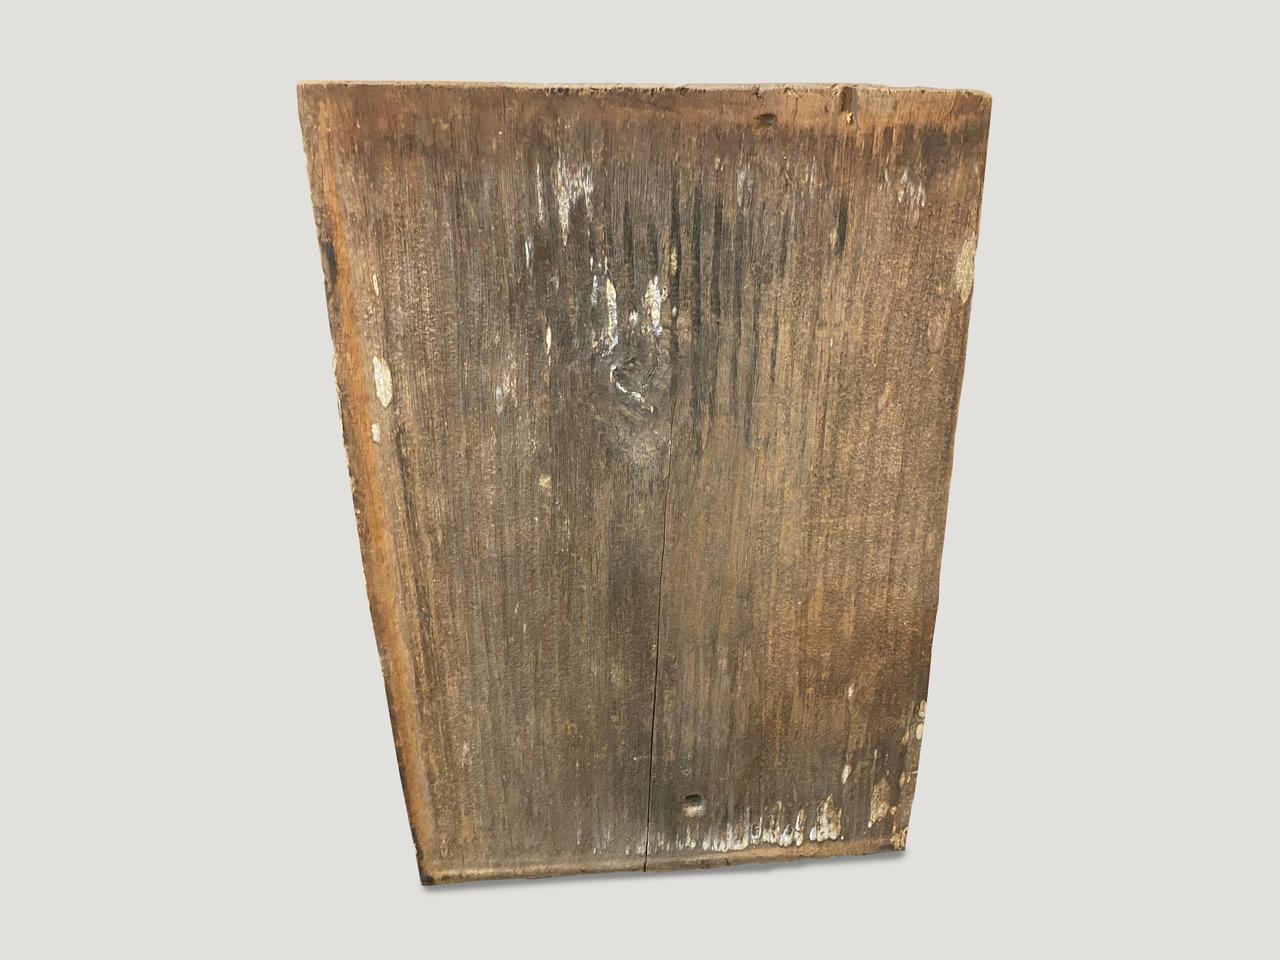 Antique hand carved architectural panel from Toraja. This carving symbolizes the protection of the home. Originally used as an exterior panel. Great art piece.

This antique panel was sourced in the spirit of wabi-sabi, a Japanese philosophy that